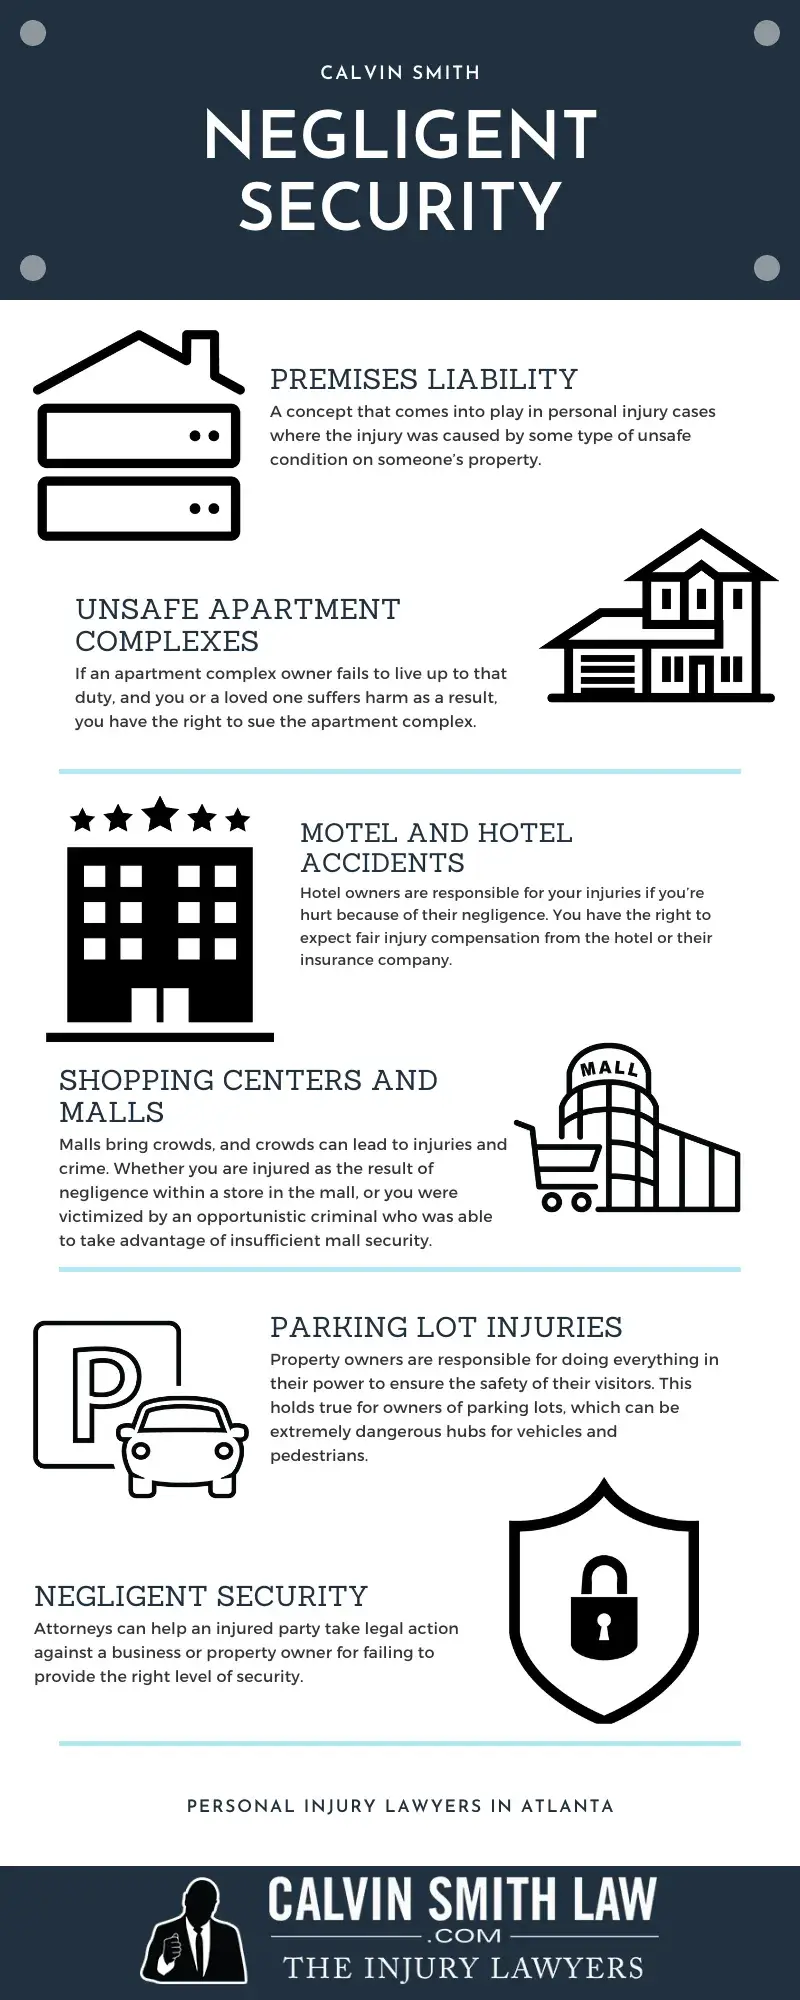 Calvin Smith Negligent Security Infographic 1 Calvin Smith Law Firm